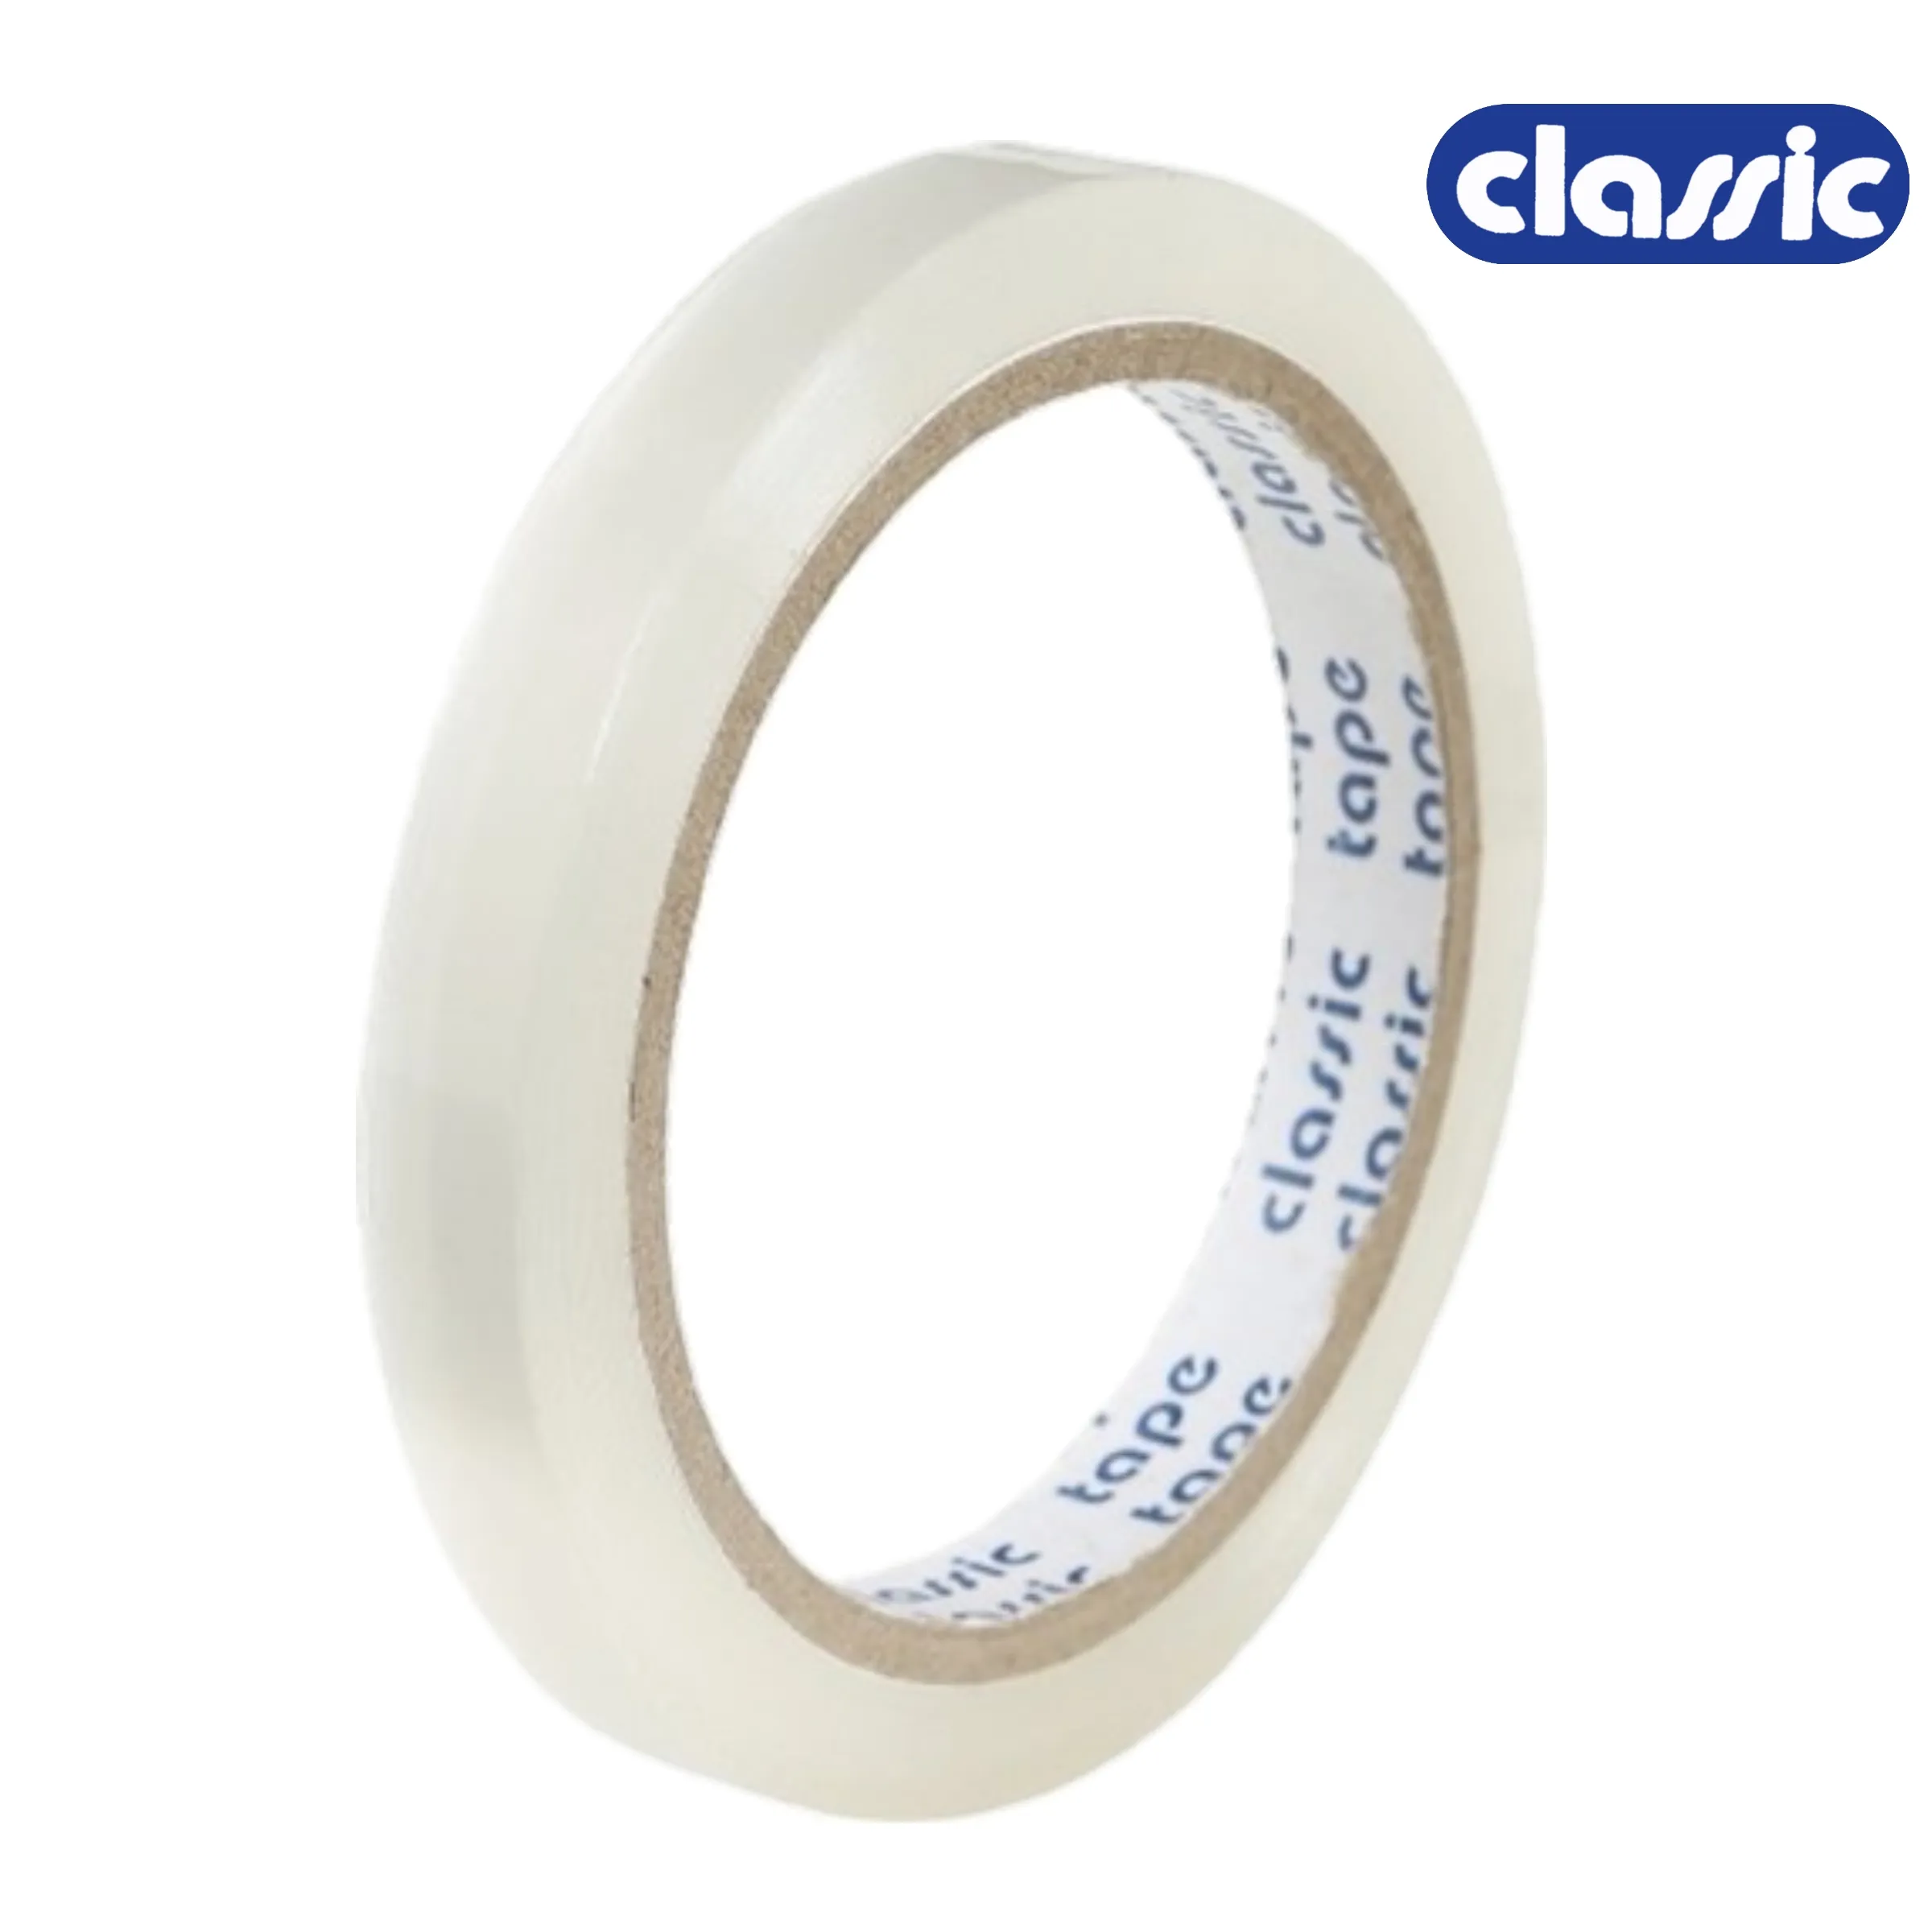 Classic 30 Micron 12 mm Transparent Self Adhesive Tape, Premium Quality, 1 Pack of 1 Roll